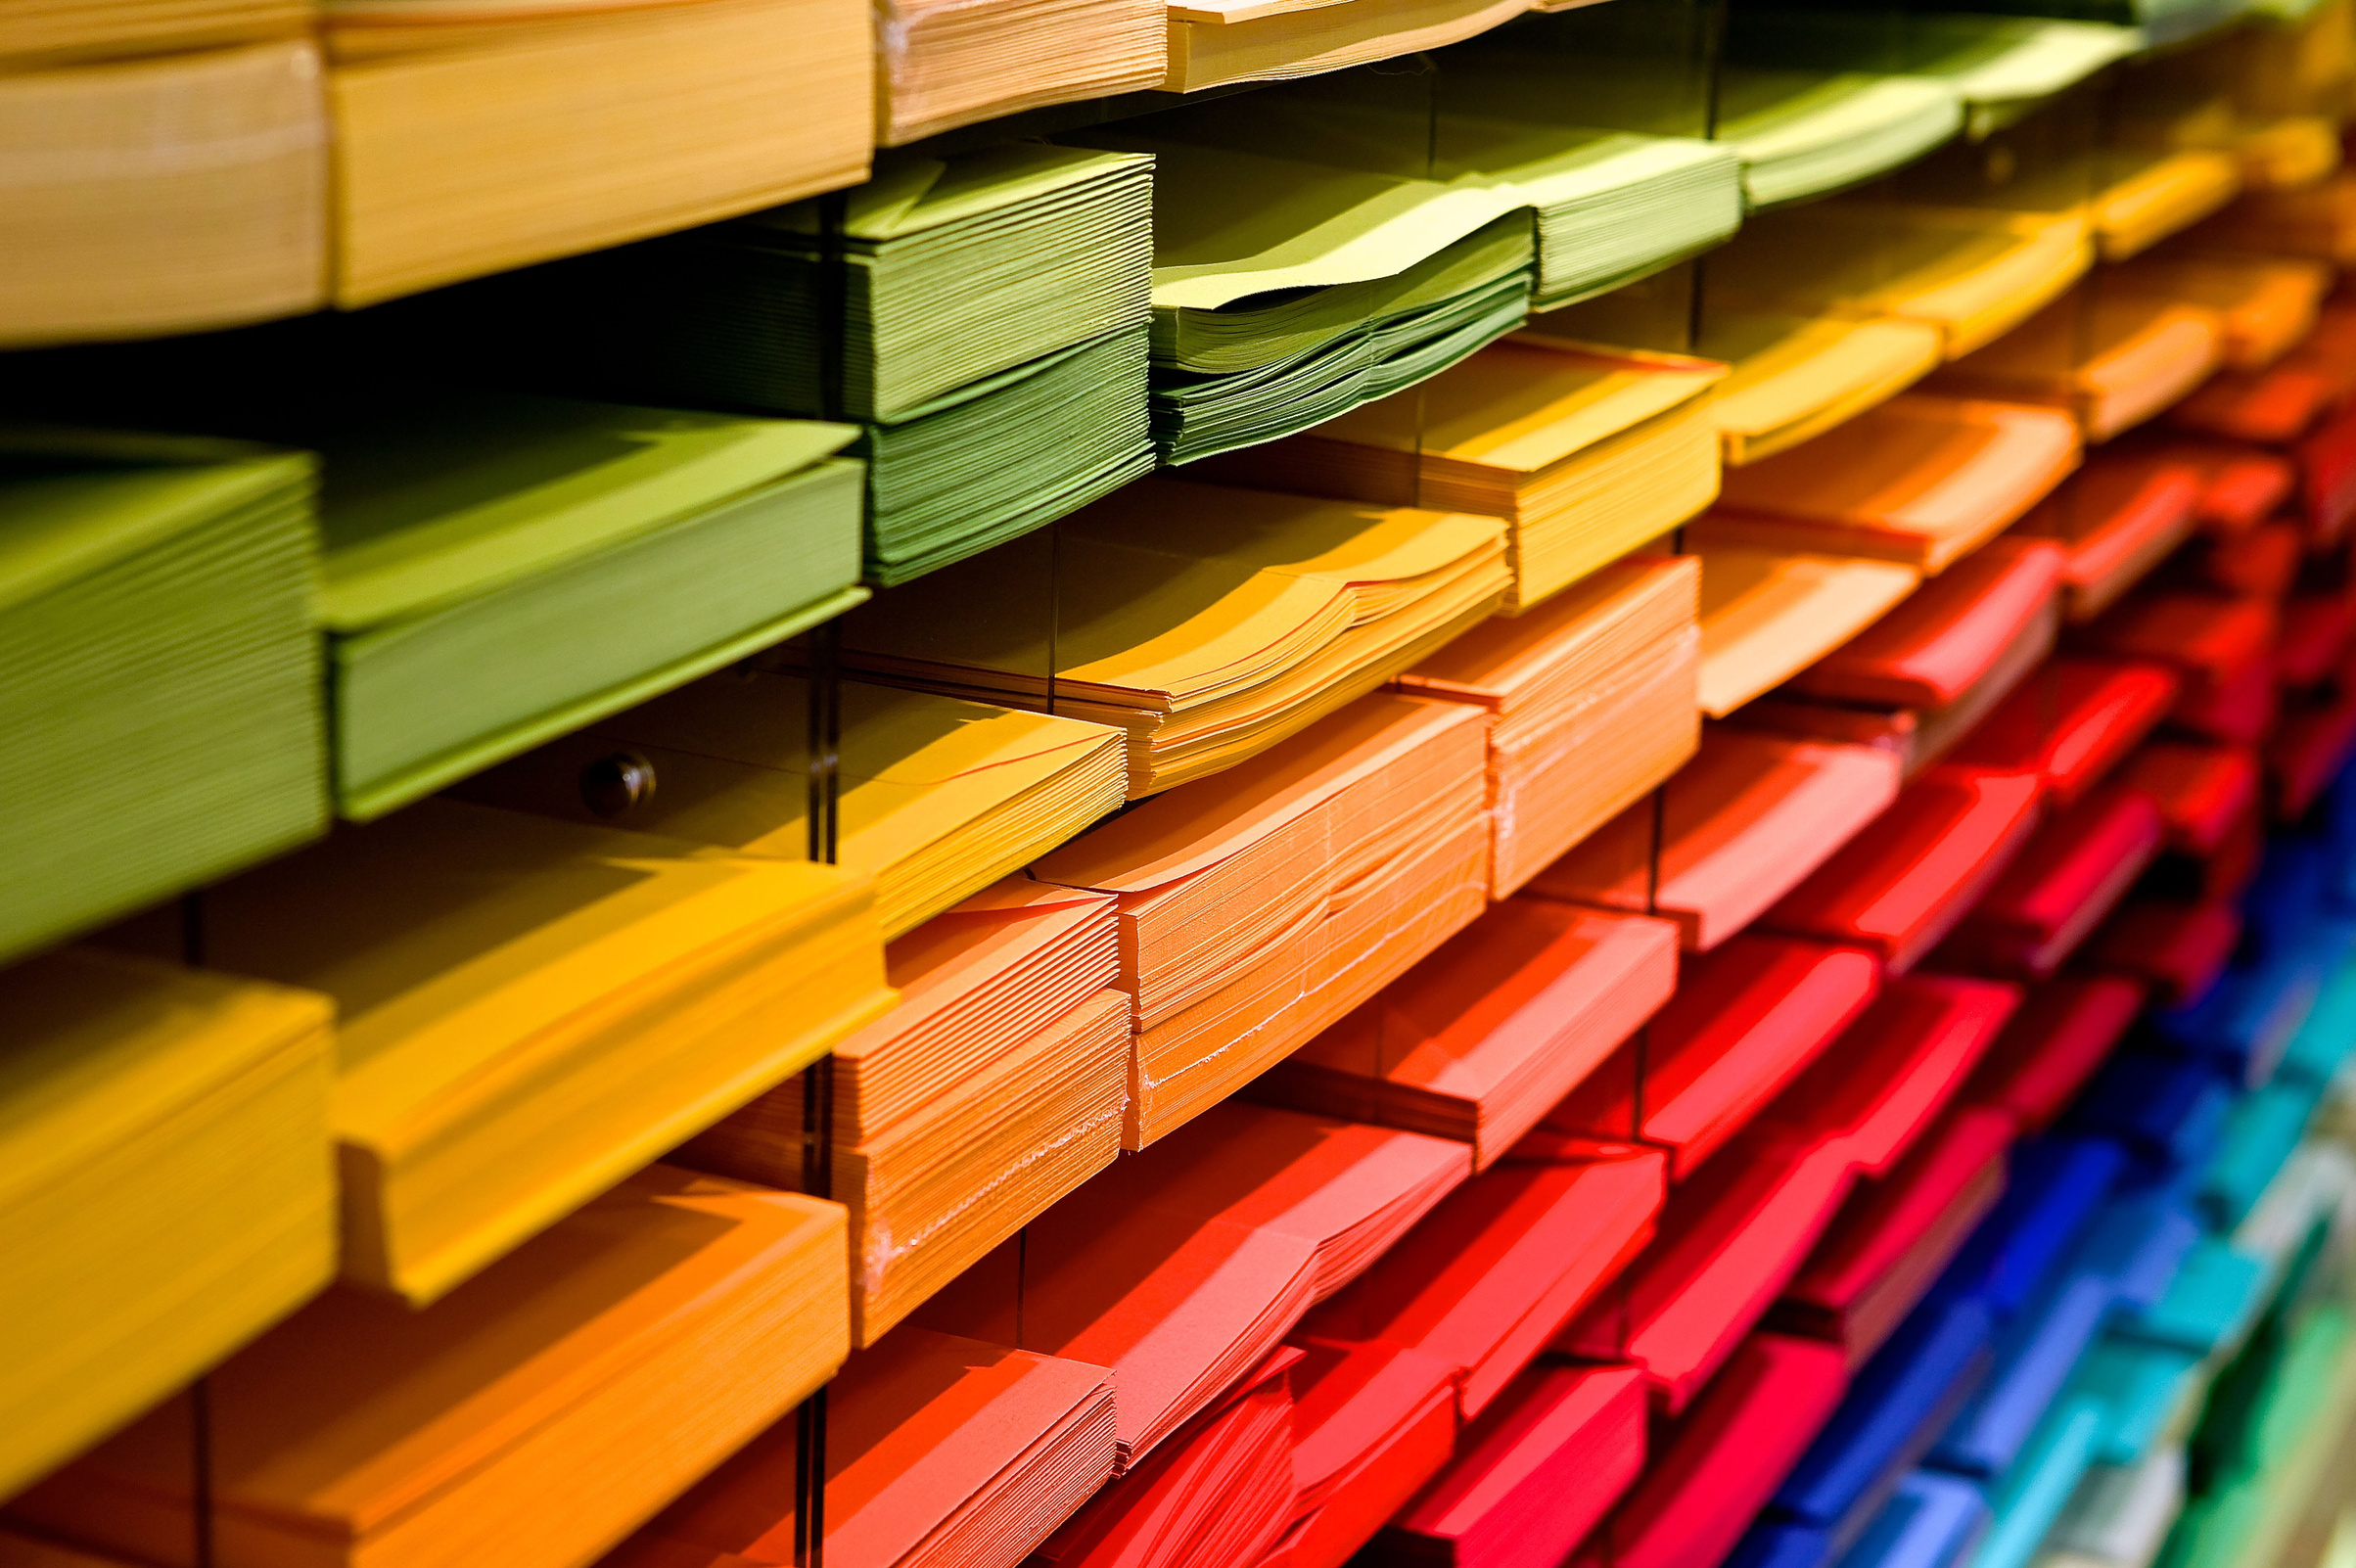 Colored Papers in a Shelf